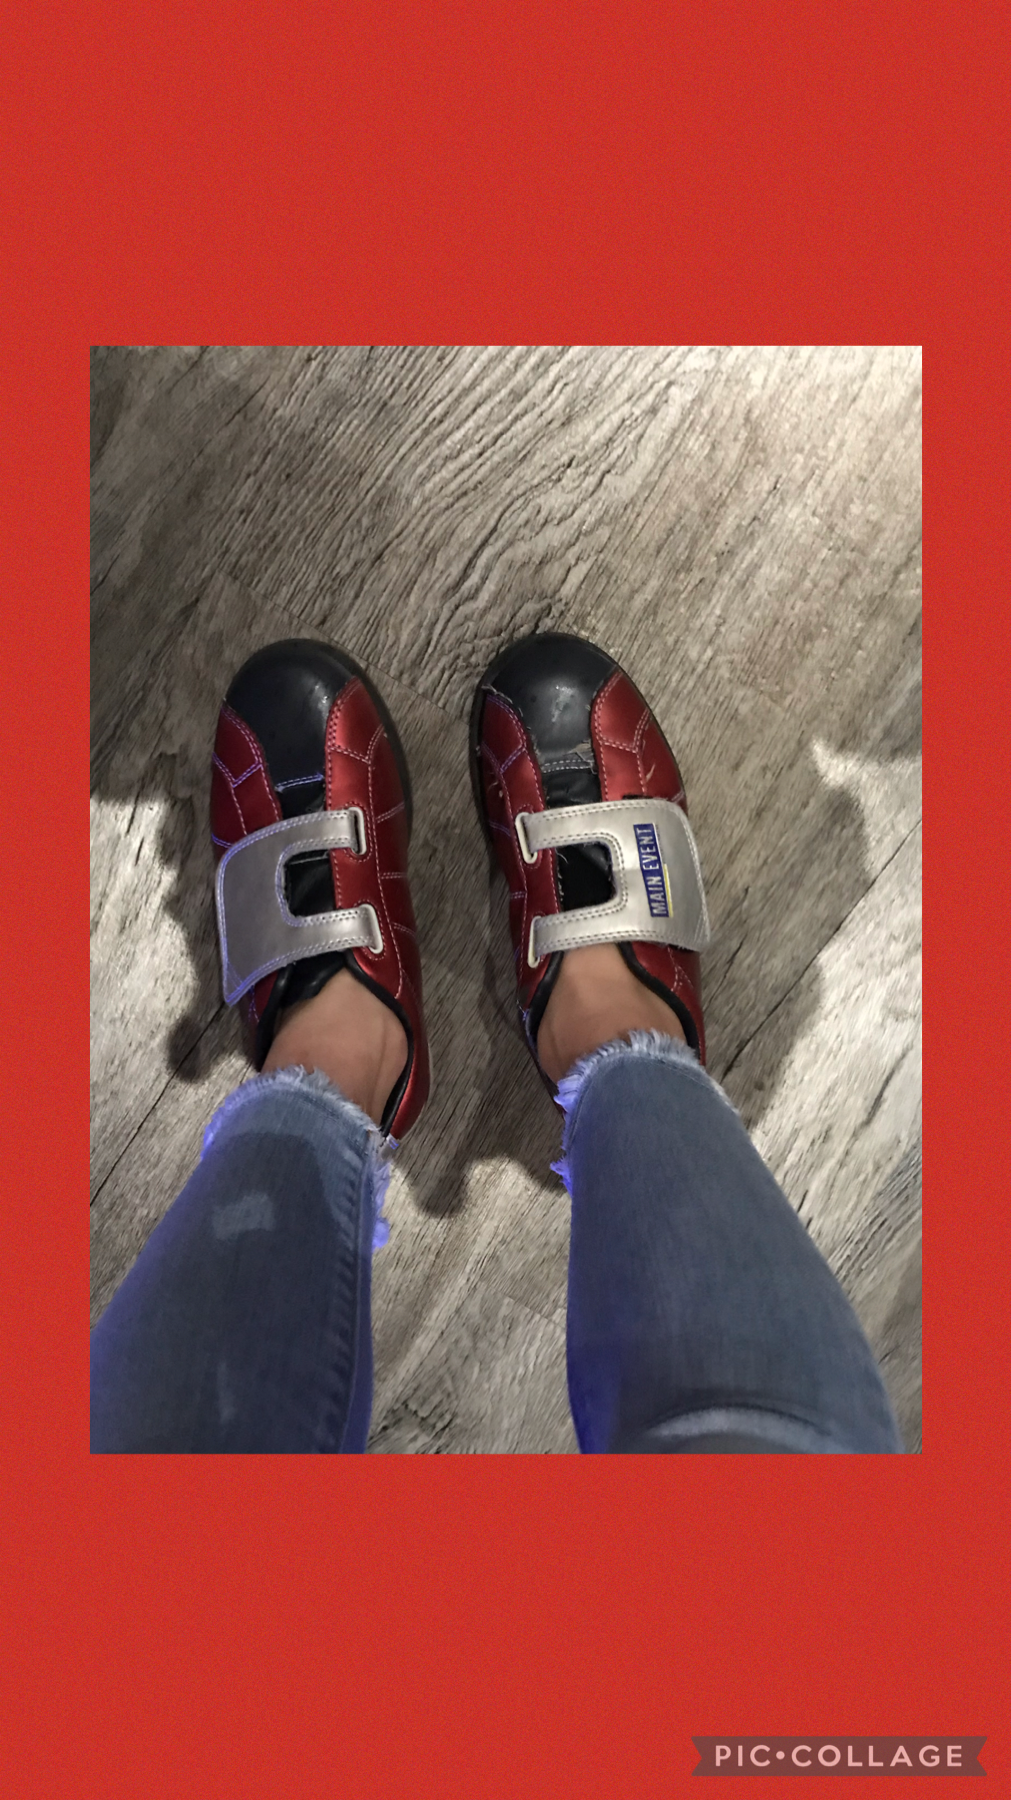 OMG I went bowling today and I had to wear these ugly shoes!!!😝😝😝😝